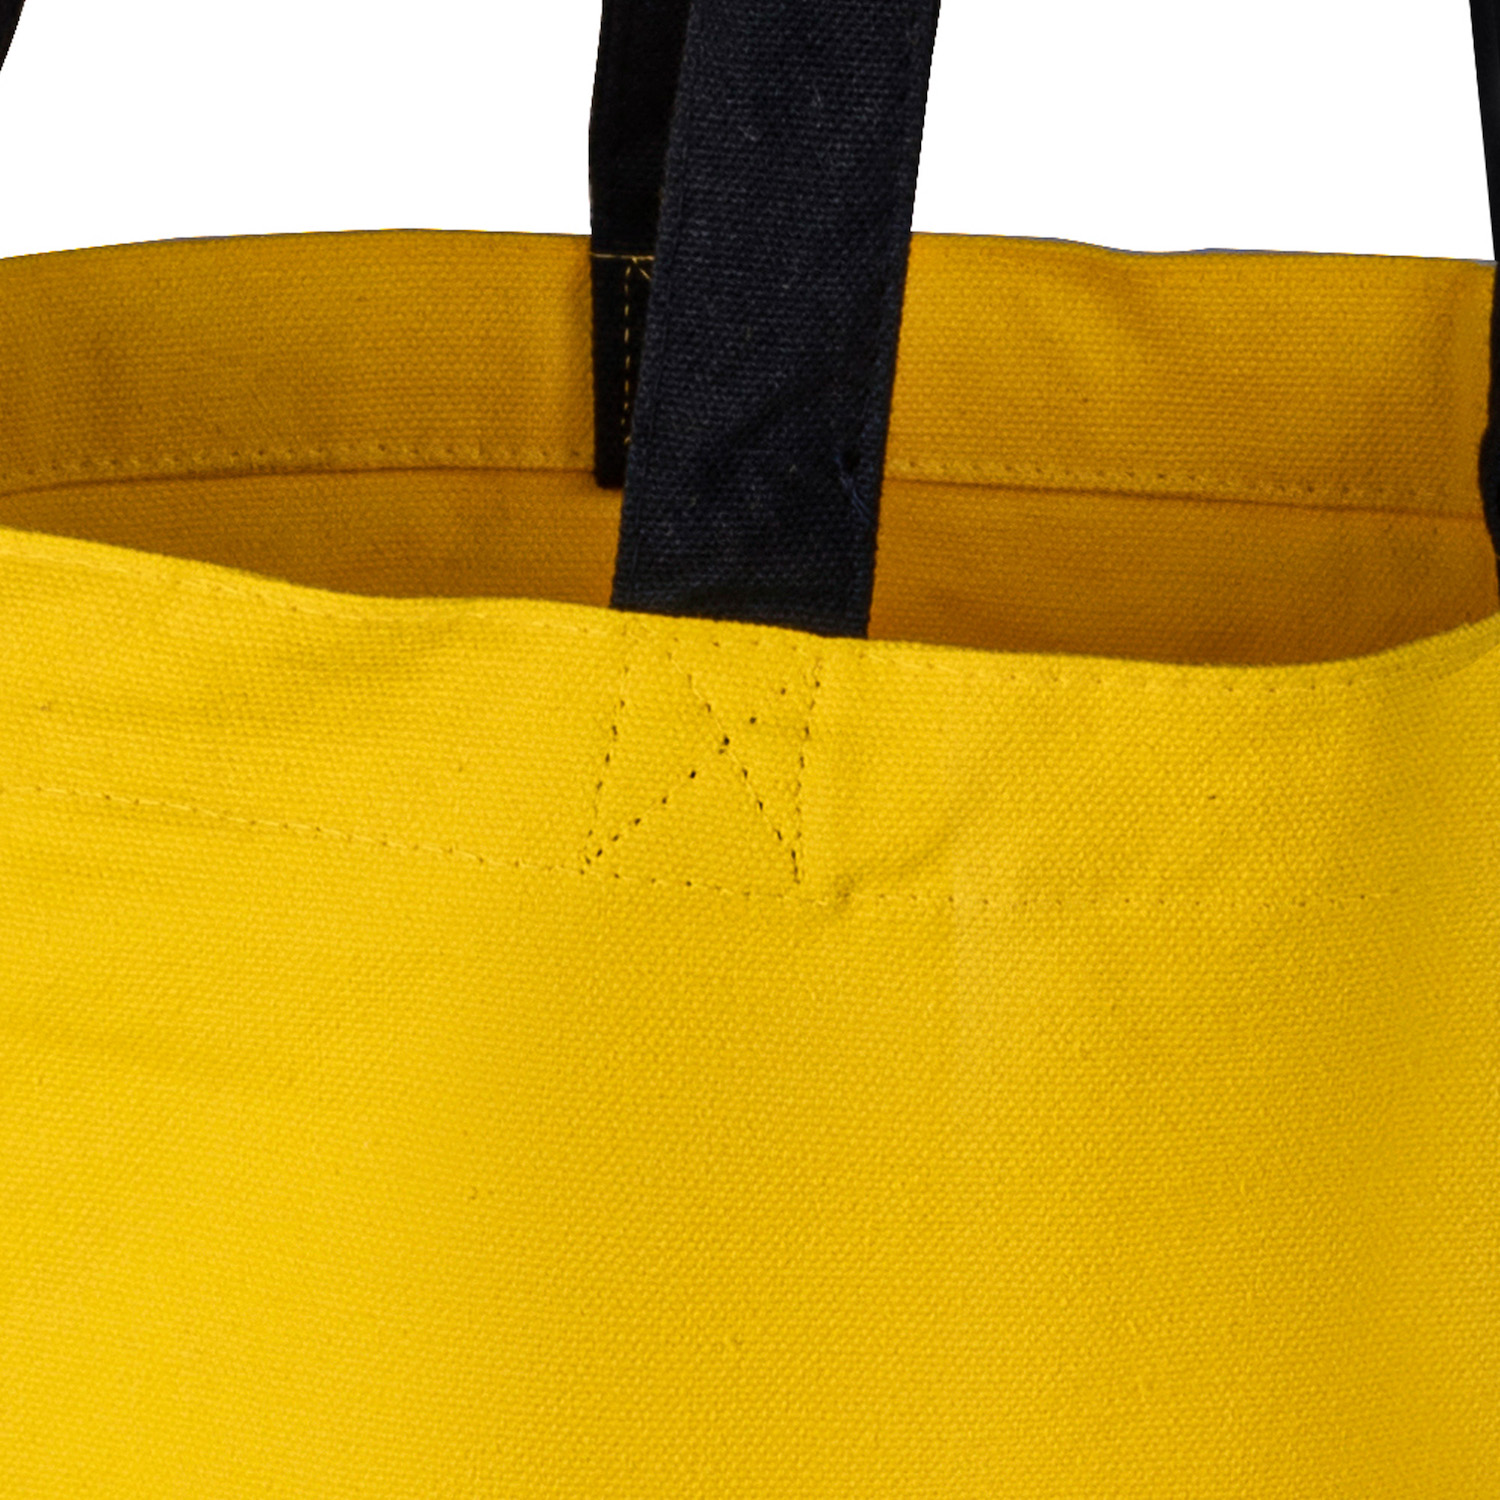 Get Loop Handle Yellow Plastic Retail Carry Bags Online @ Genuine Prices  With Fast Delivery